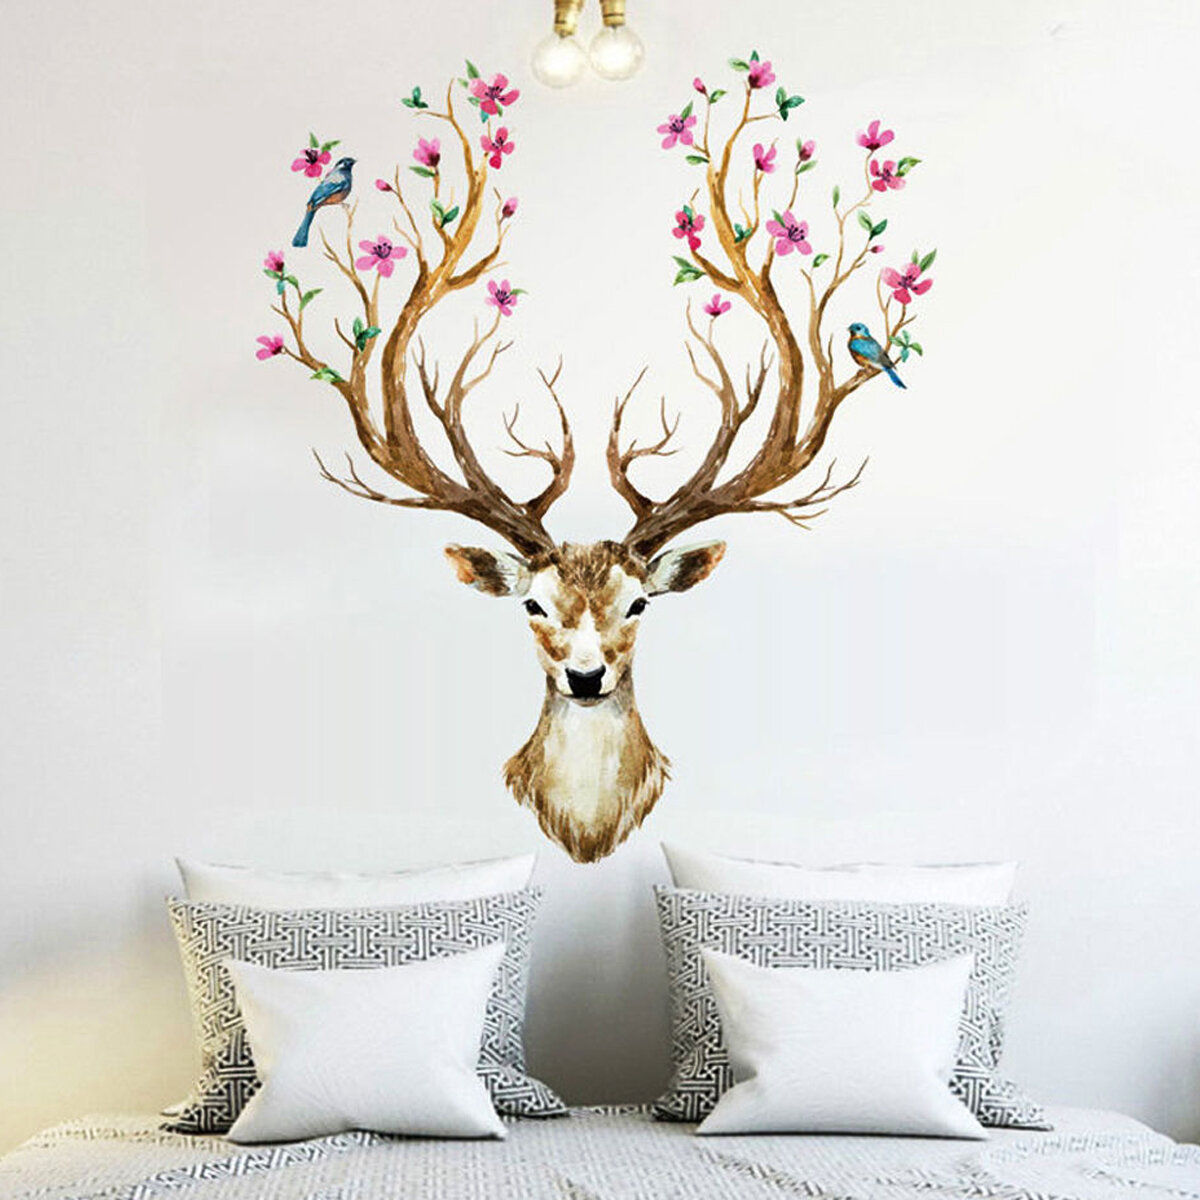 

Deer Head Flowers Birds Wall Stickers Vinyl Decal Removable Home Decor